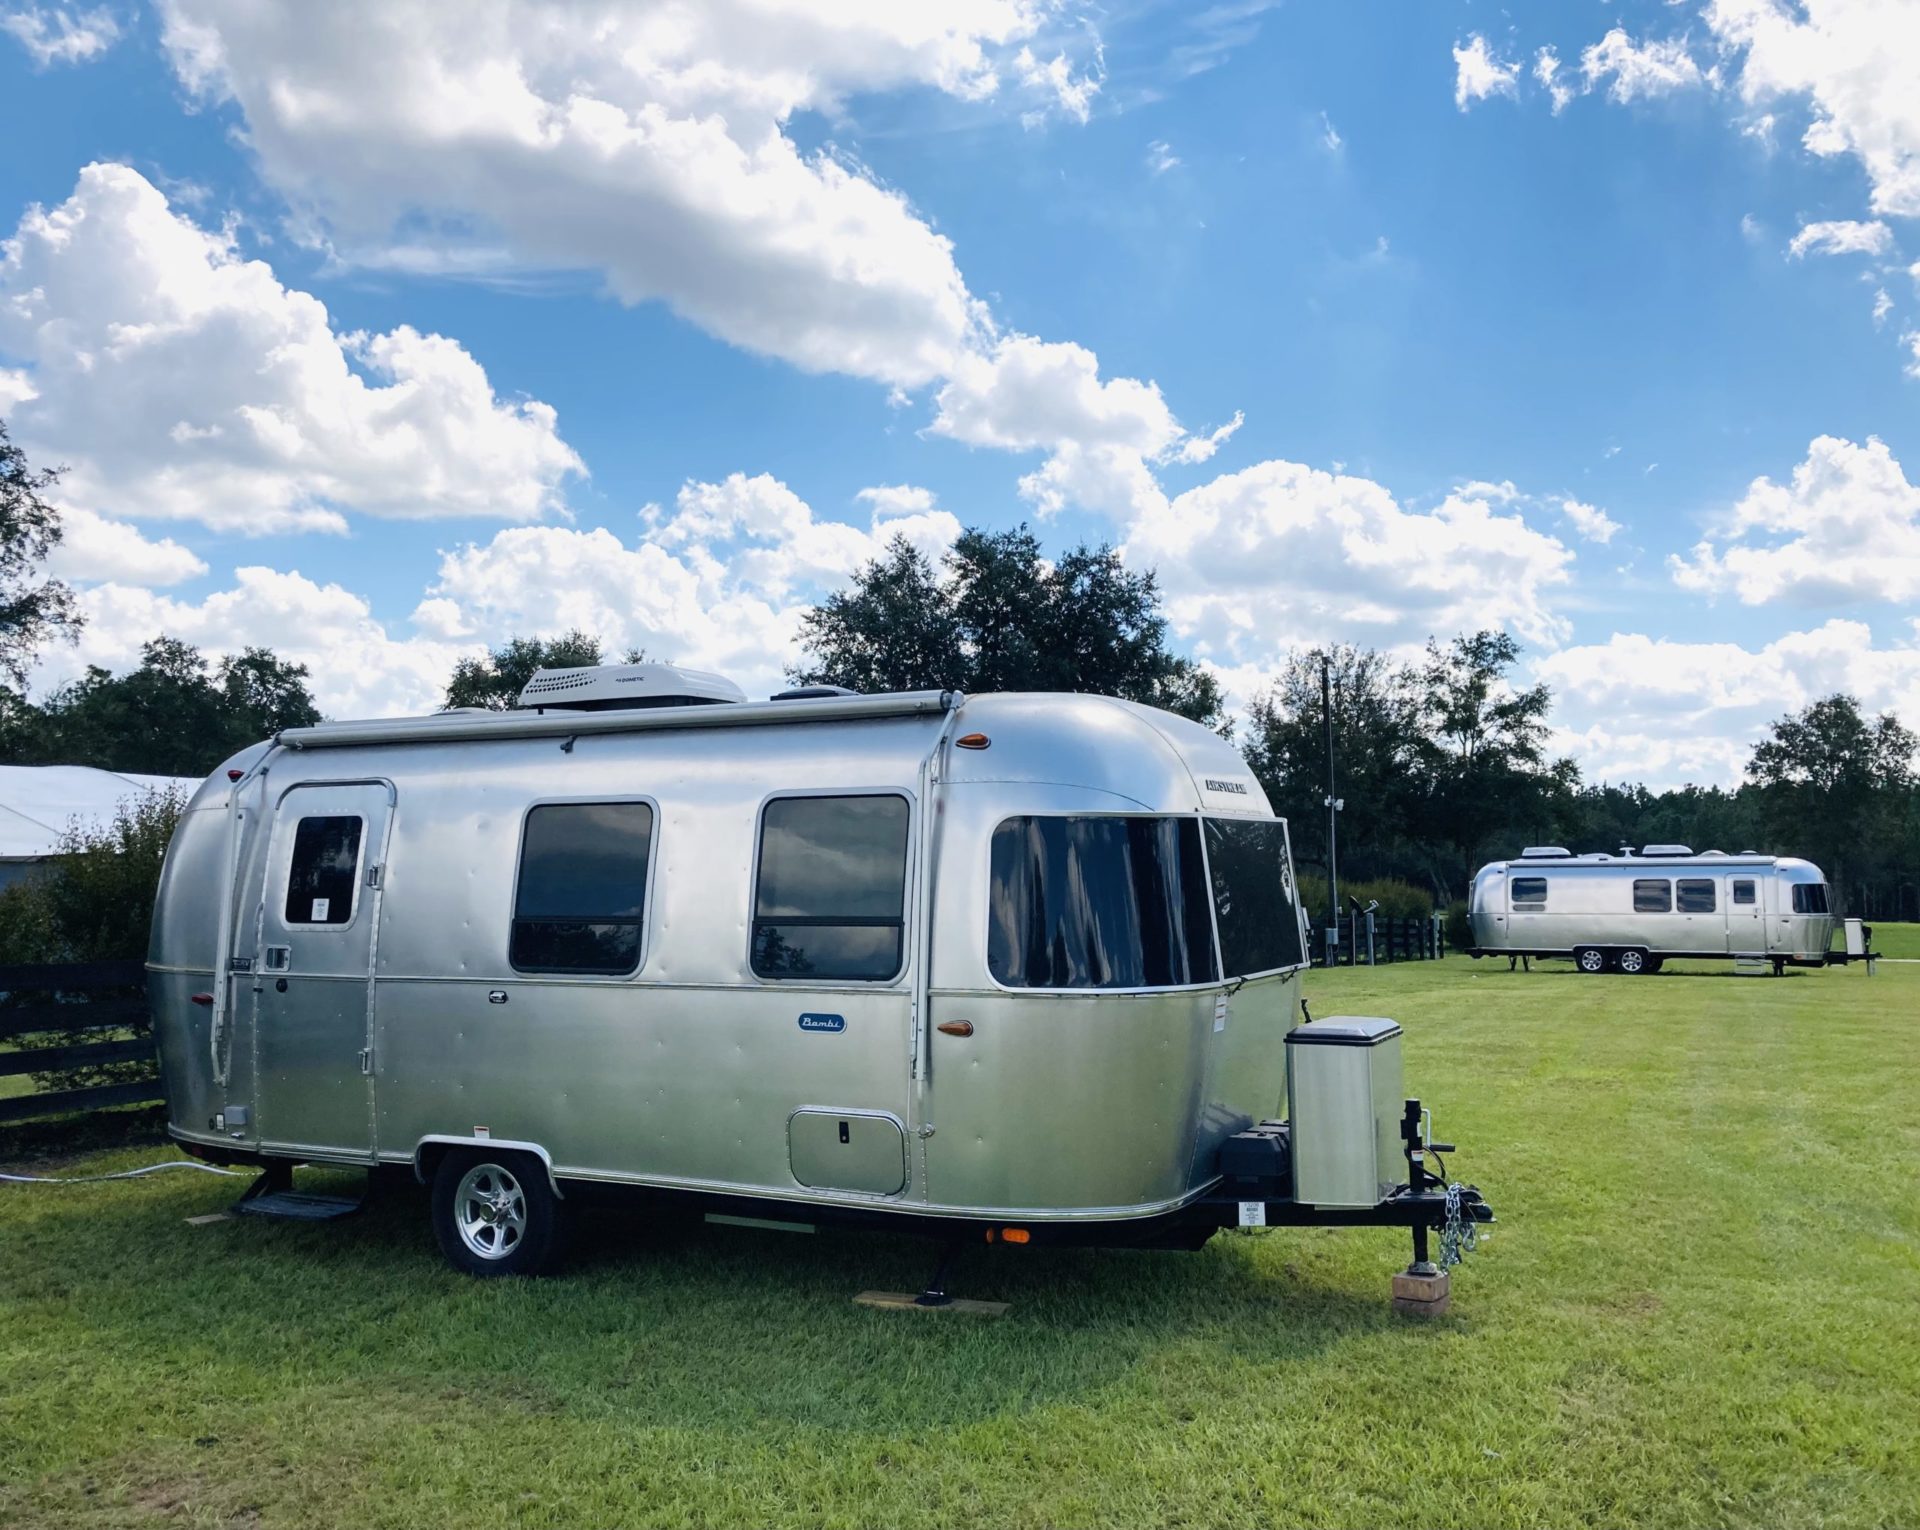 Spend the Night in a Central Florida Airstream